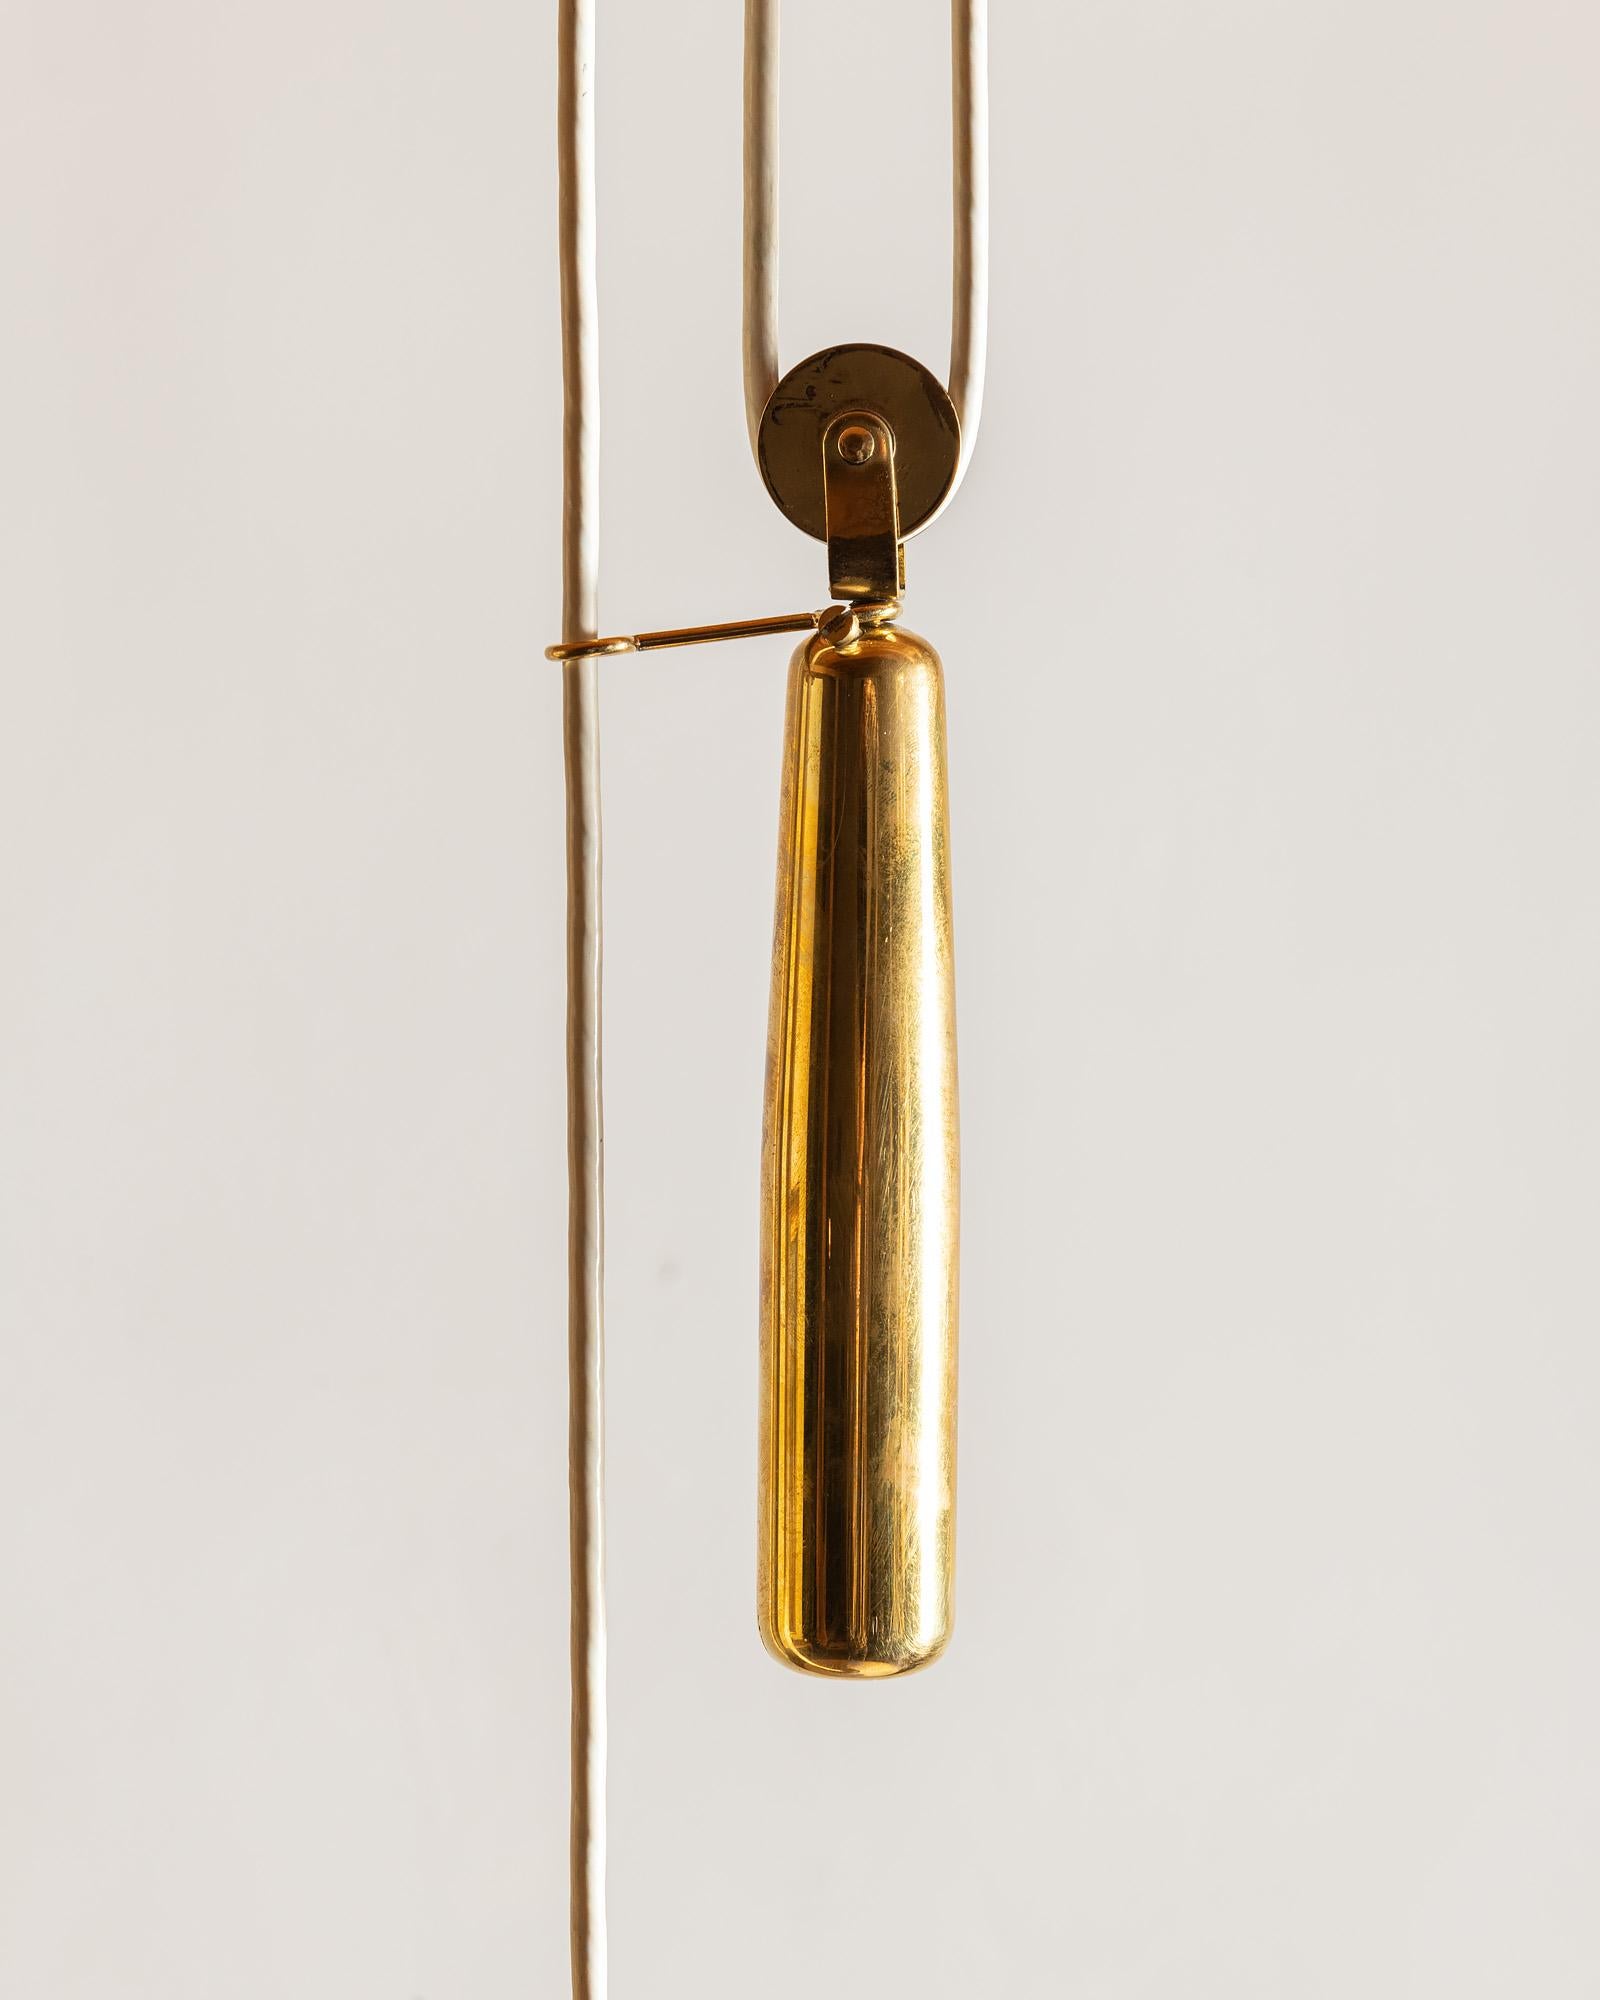 Finnish Paavo Tynell Rare Linen and Brass Pendant Lamp for Taito Oy, 1940s